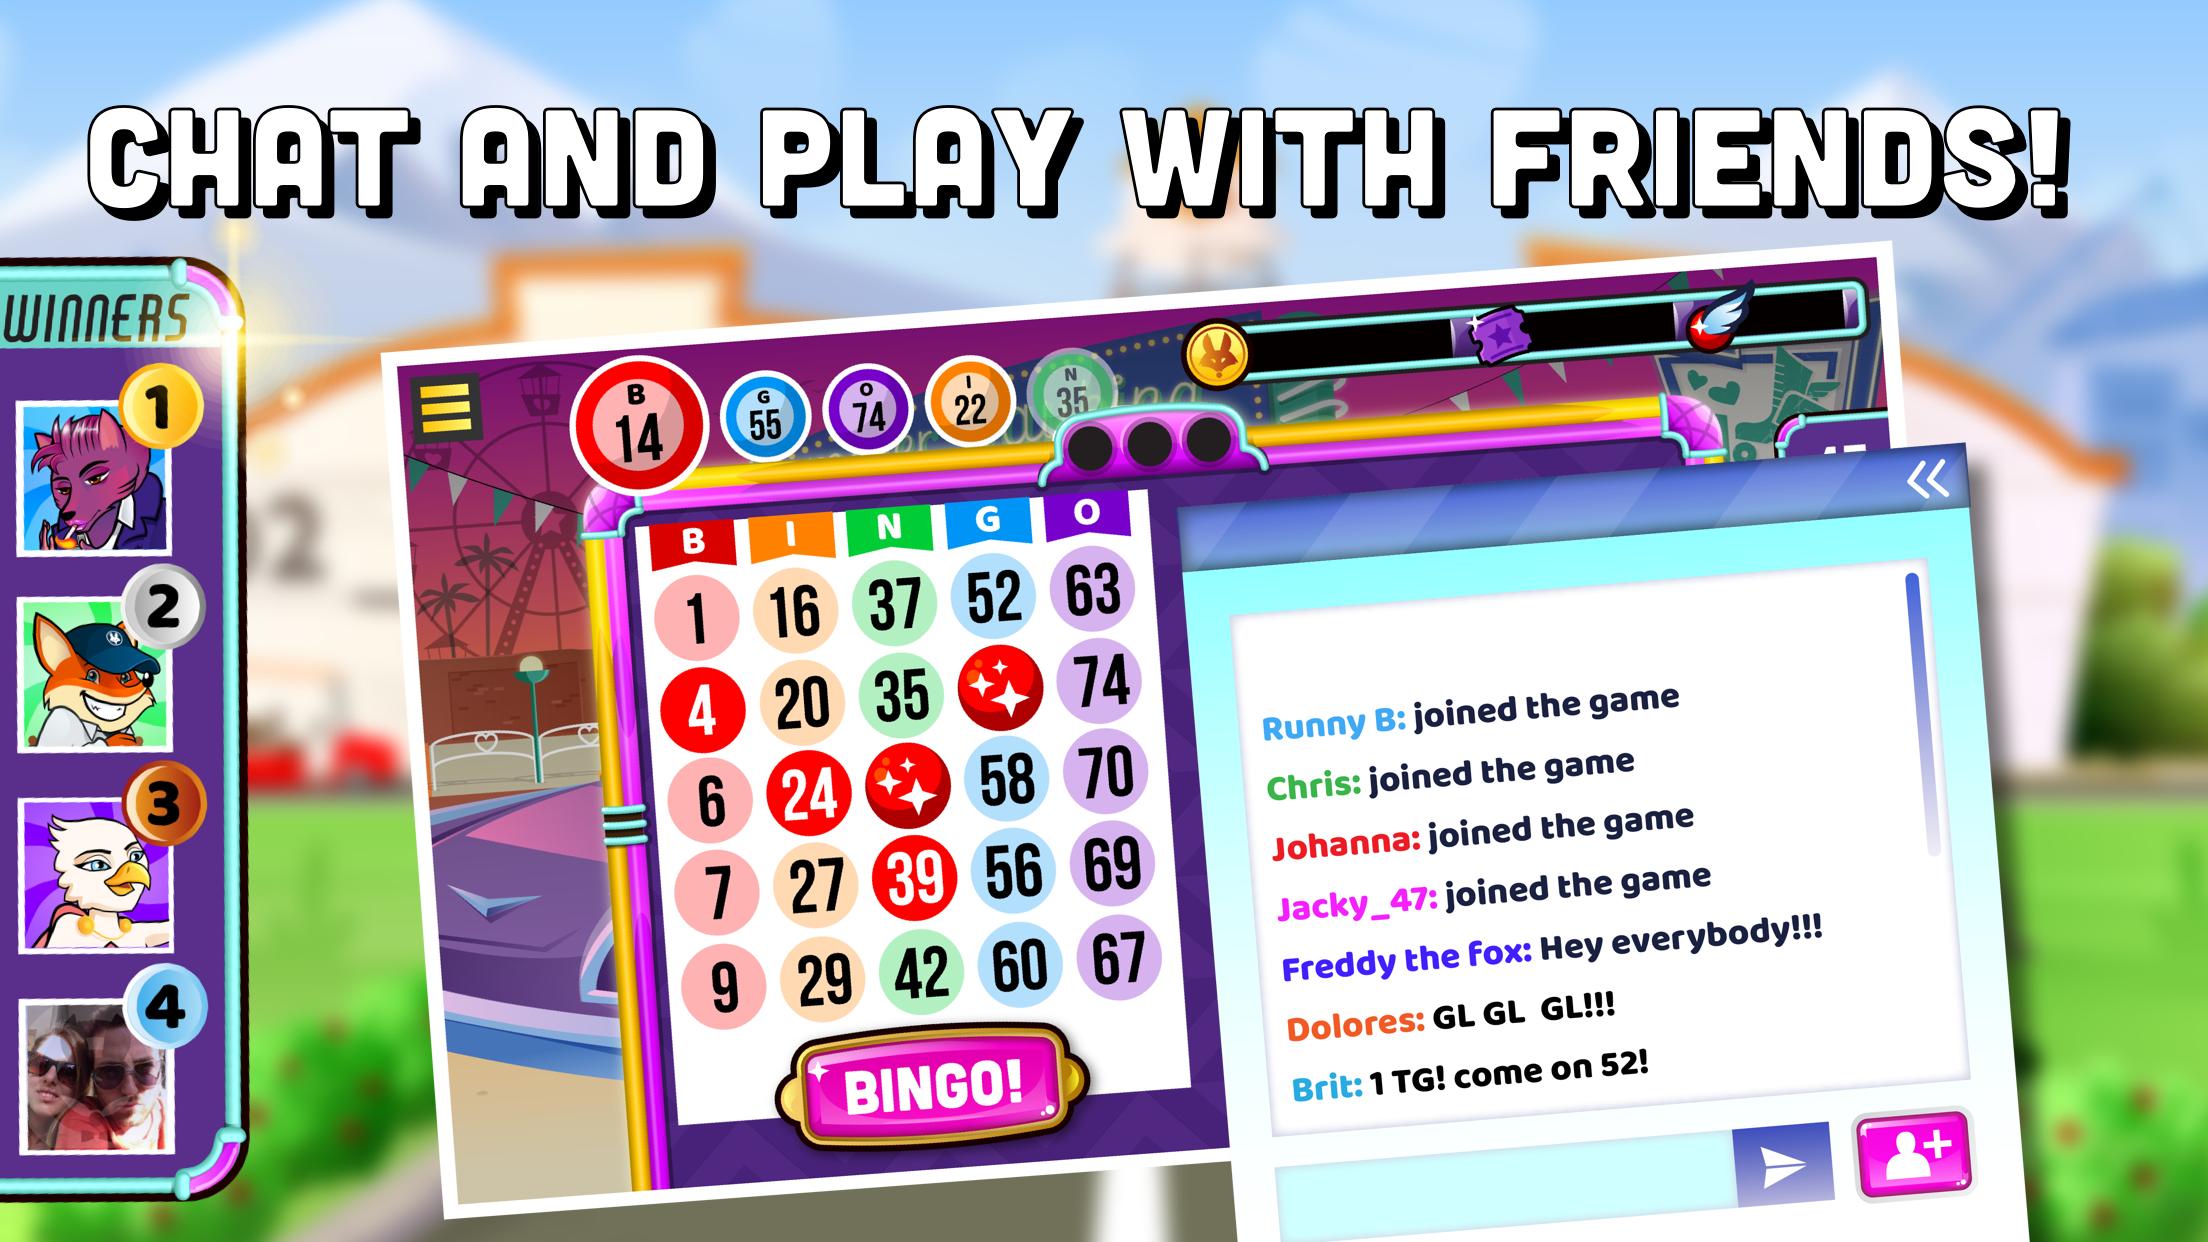 Can you play bingo online with friends